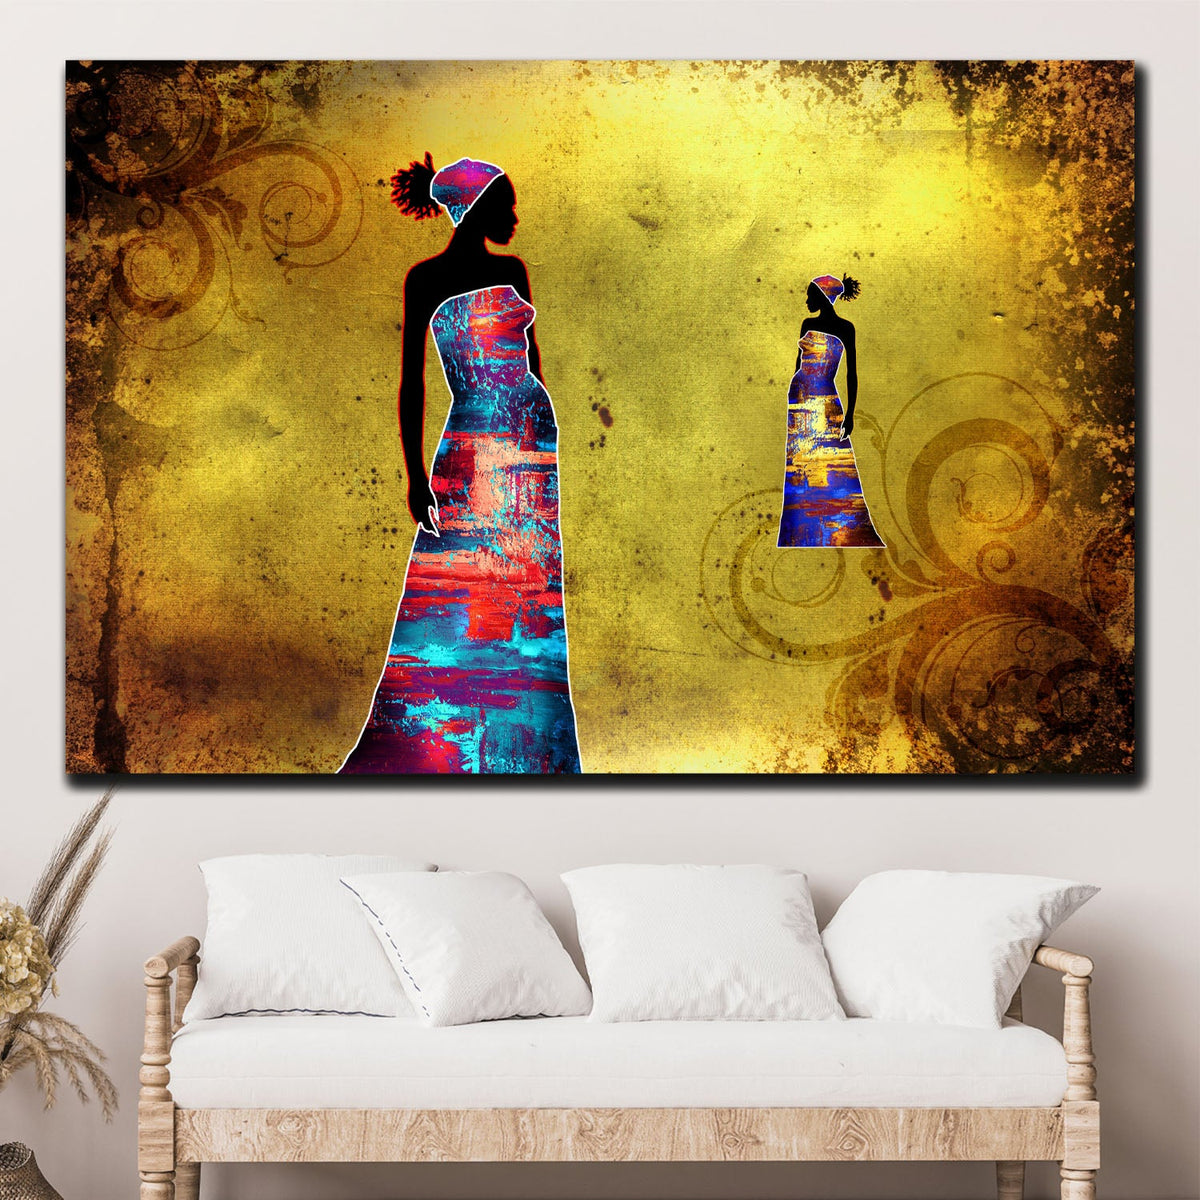 https://cdn.shopify.com/s/files/1/0387/9986/8044/products/AfricanEthnicWomanCanvasArtprintStretched-1.jpg